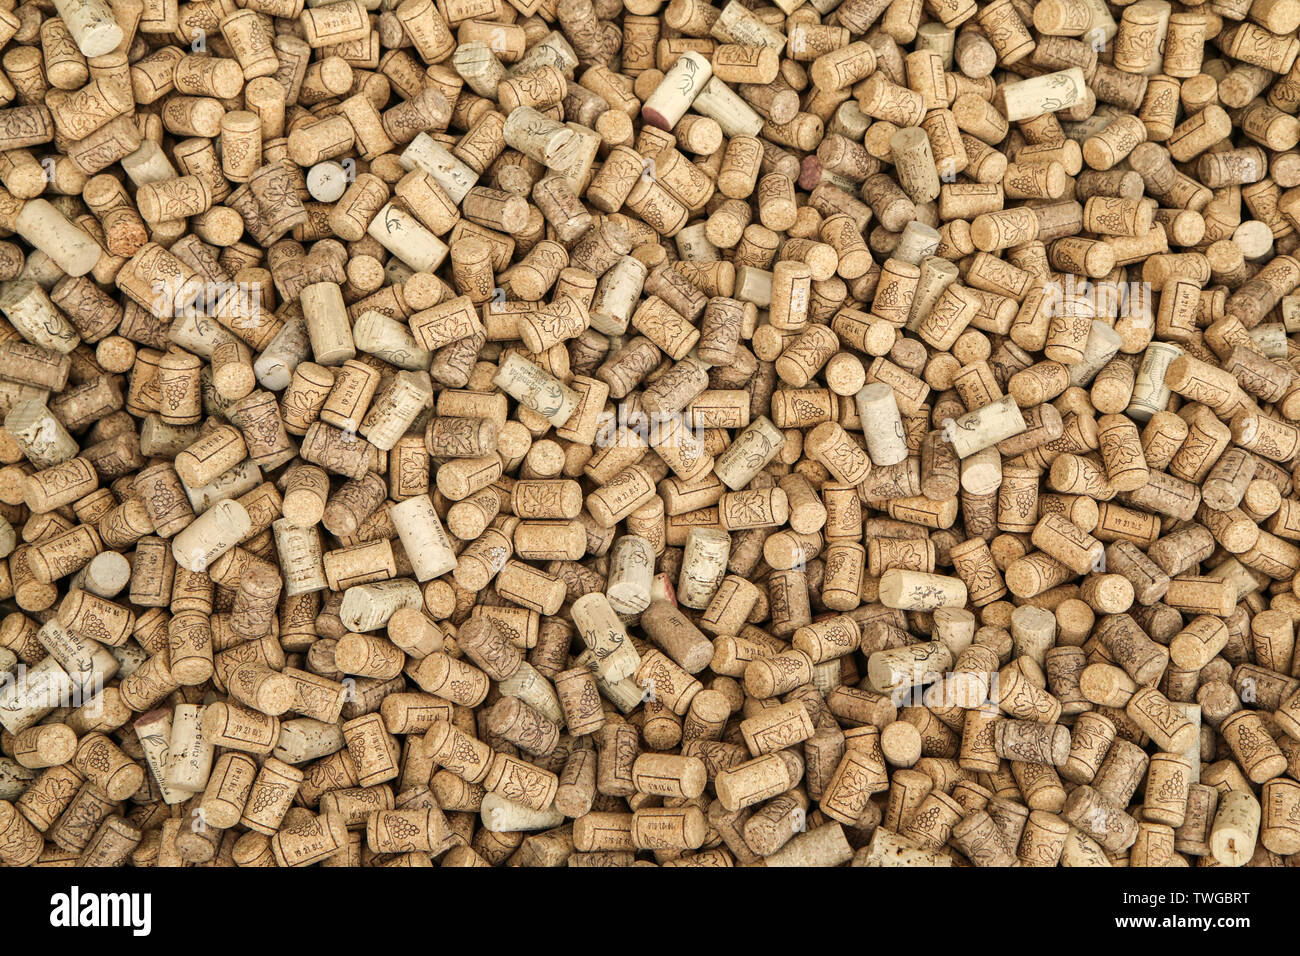 Many of cork plugs for the wine bottle in detail. Stock Photo